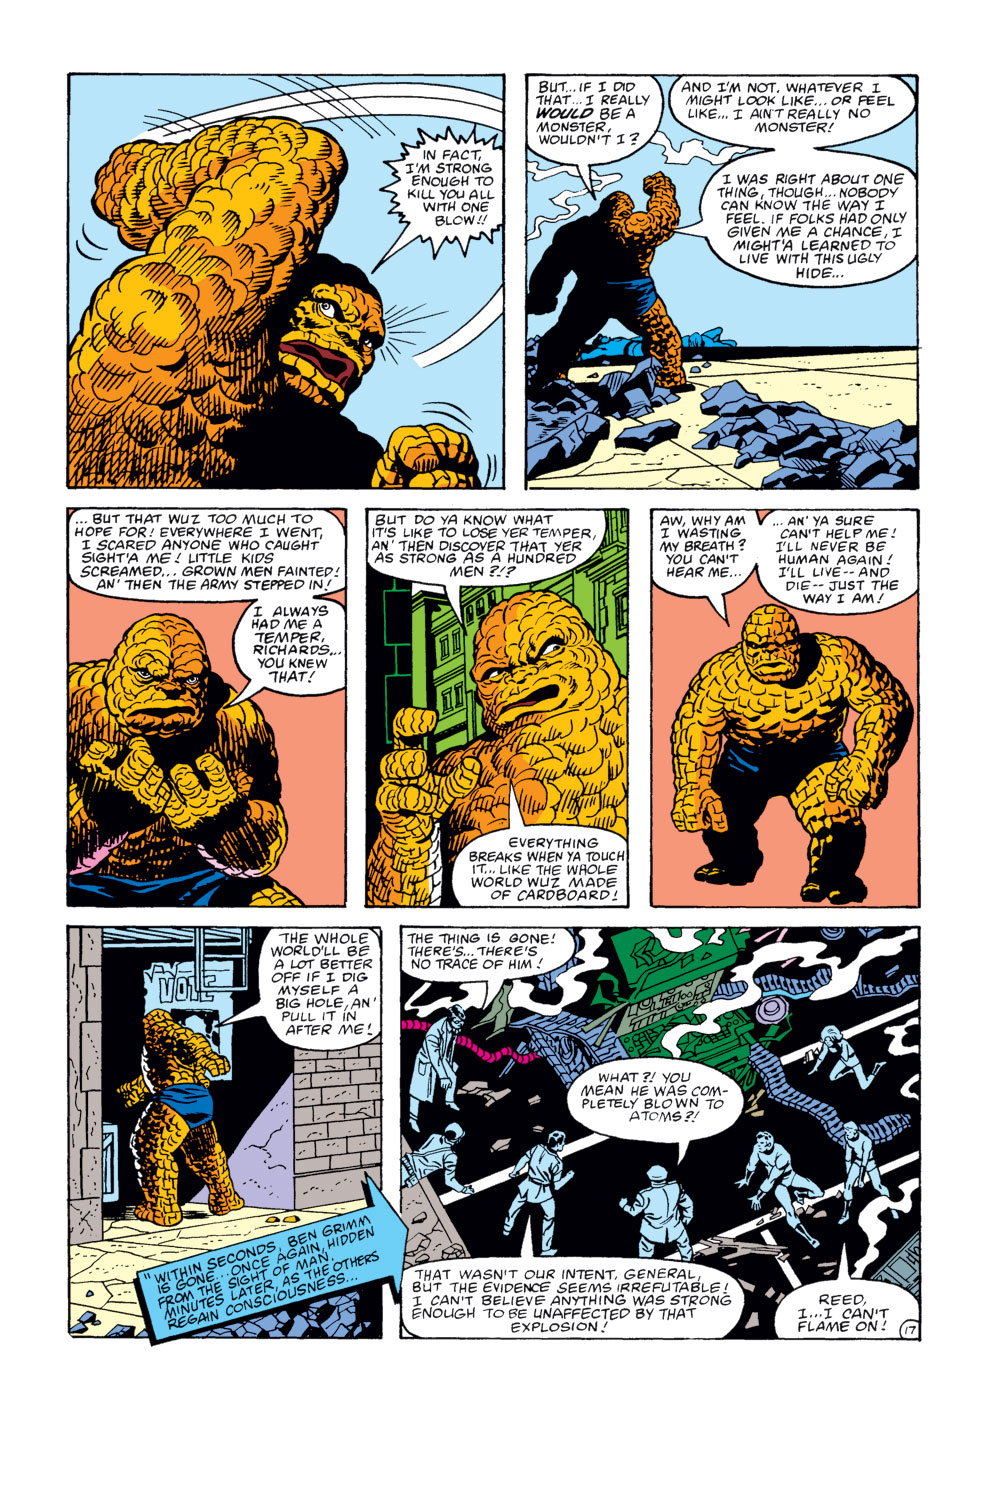 What If? (1977) issue 31 - Wolverine had killed the Hulk - Page 38